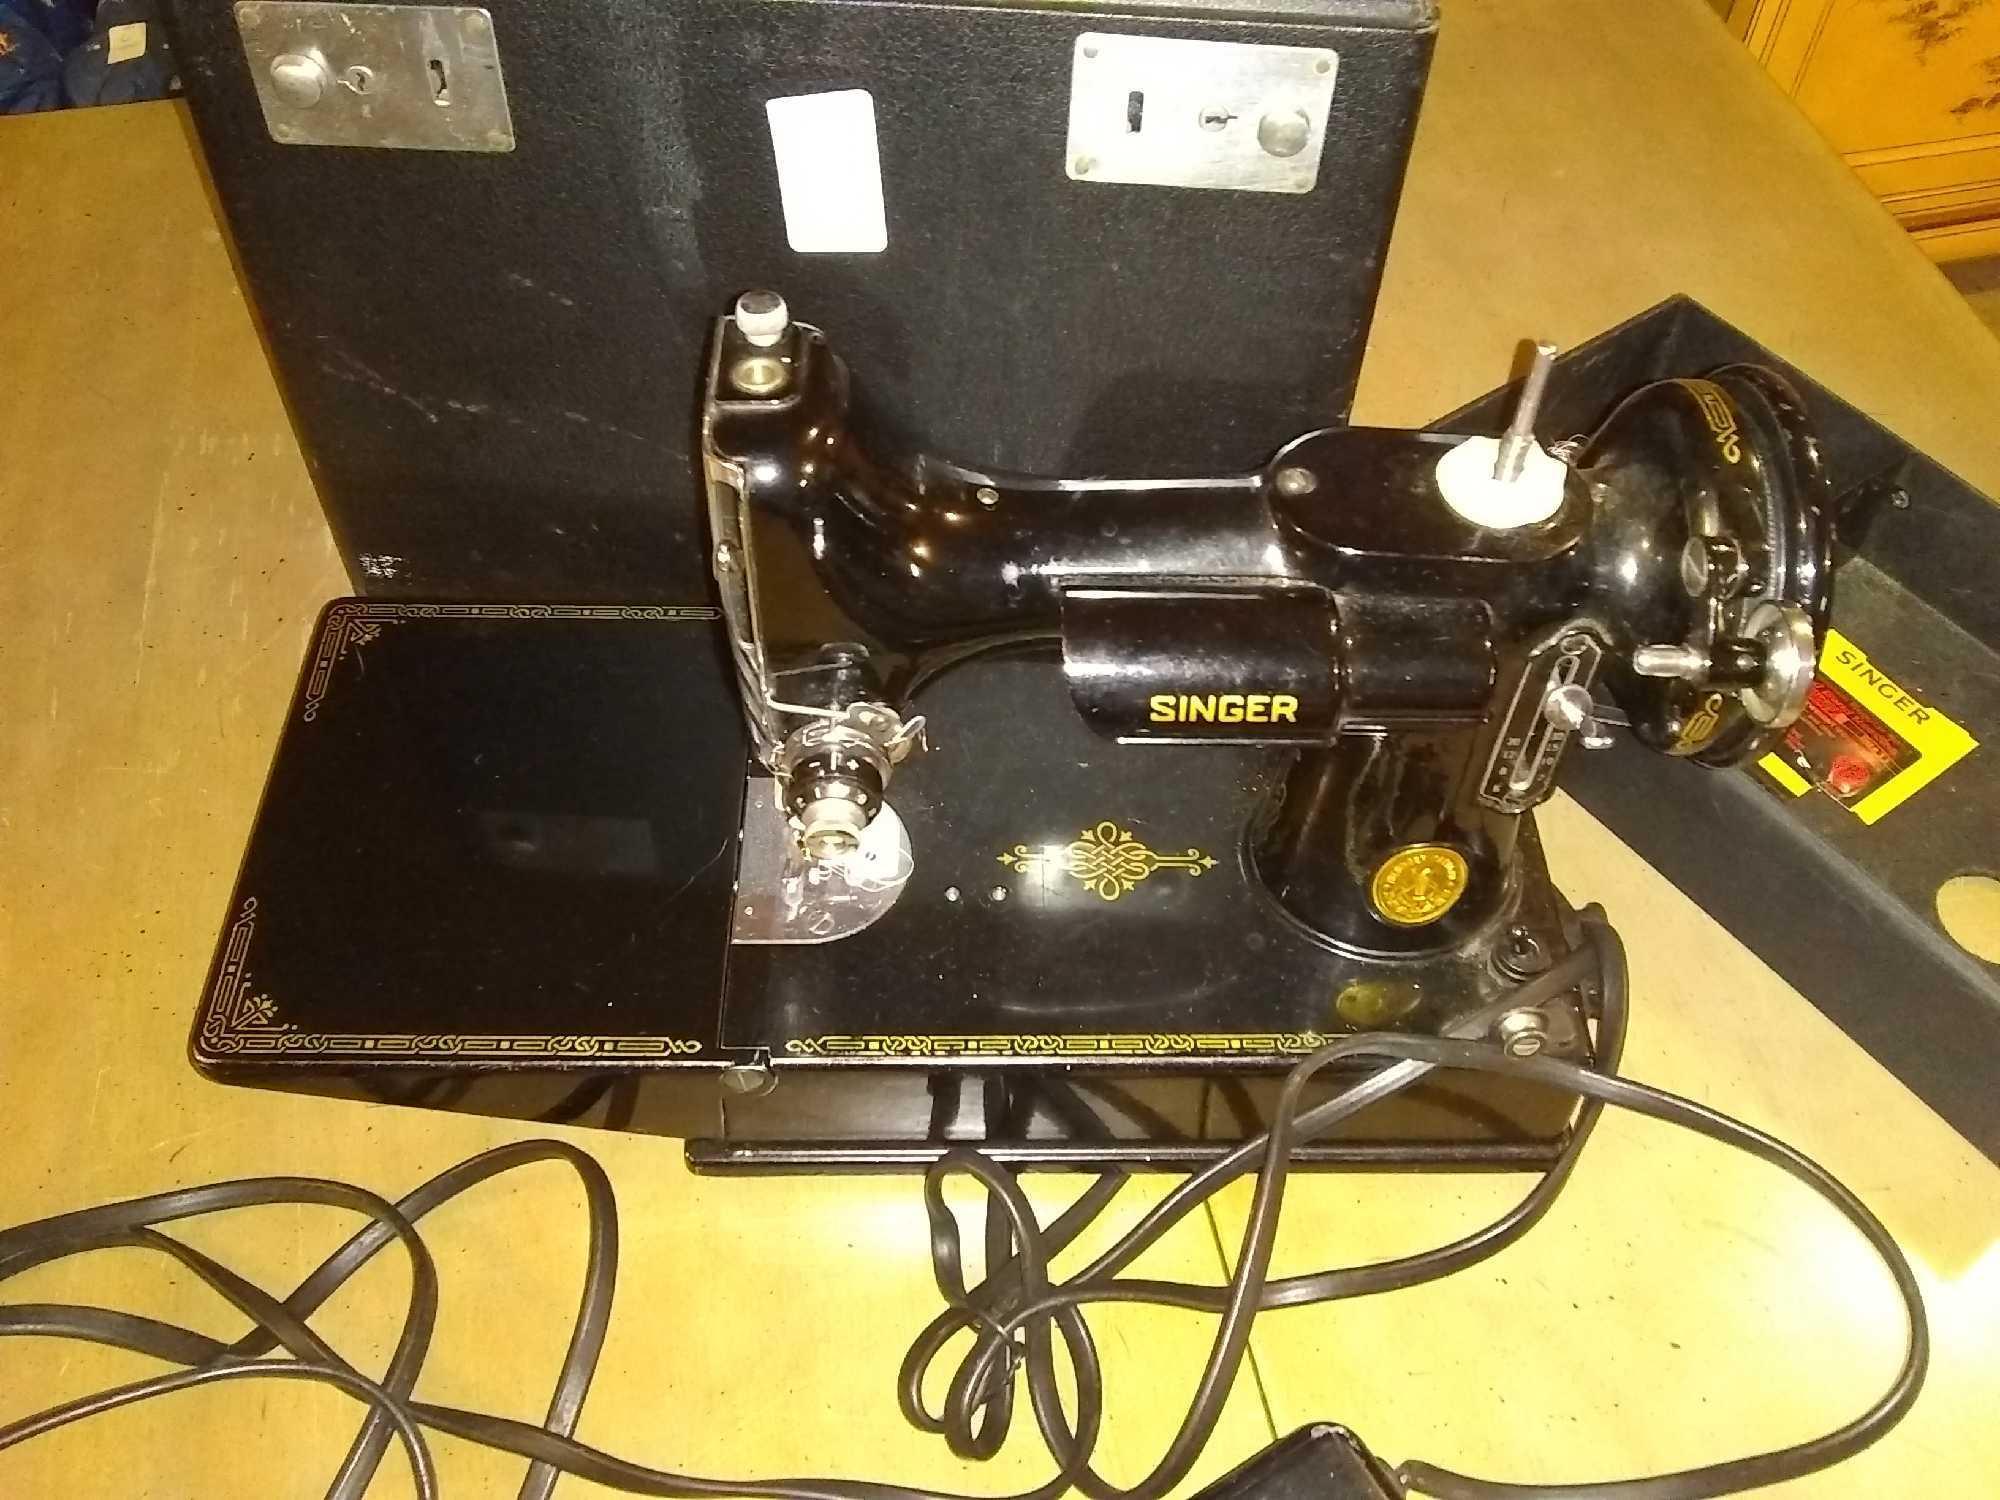 Singer sewing machine, featherweight, WITH CASE, WORKING